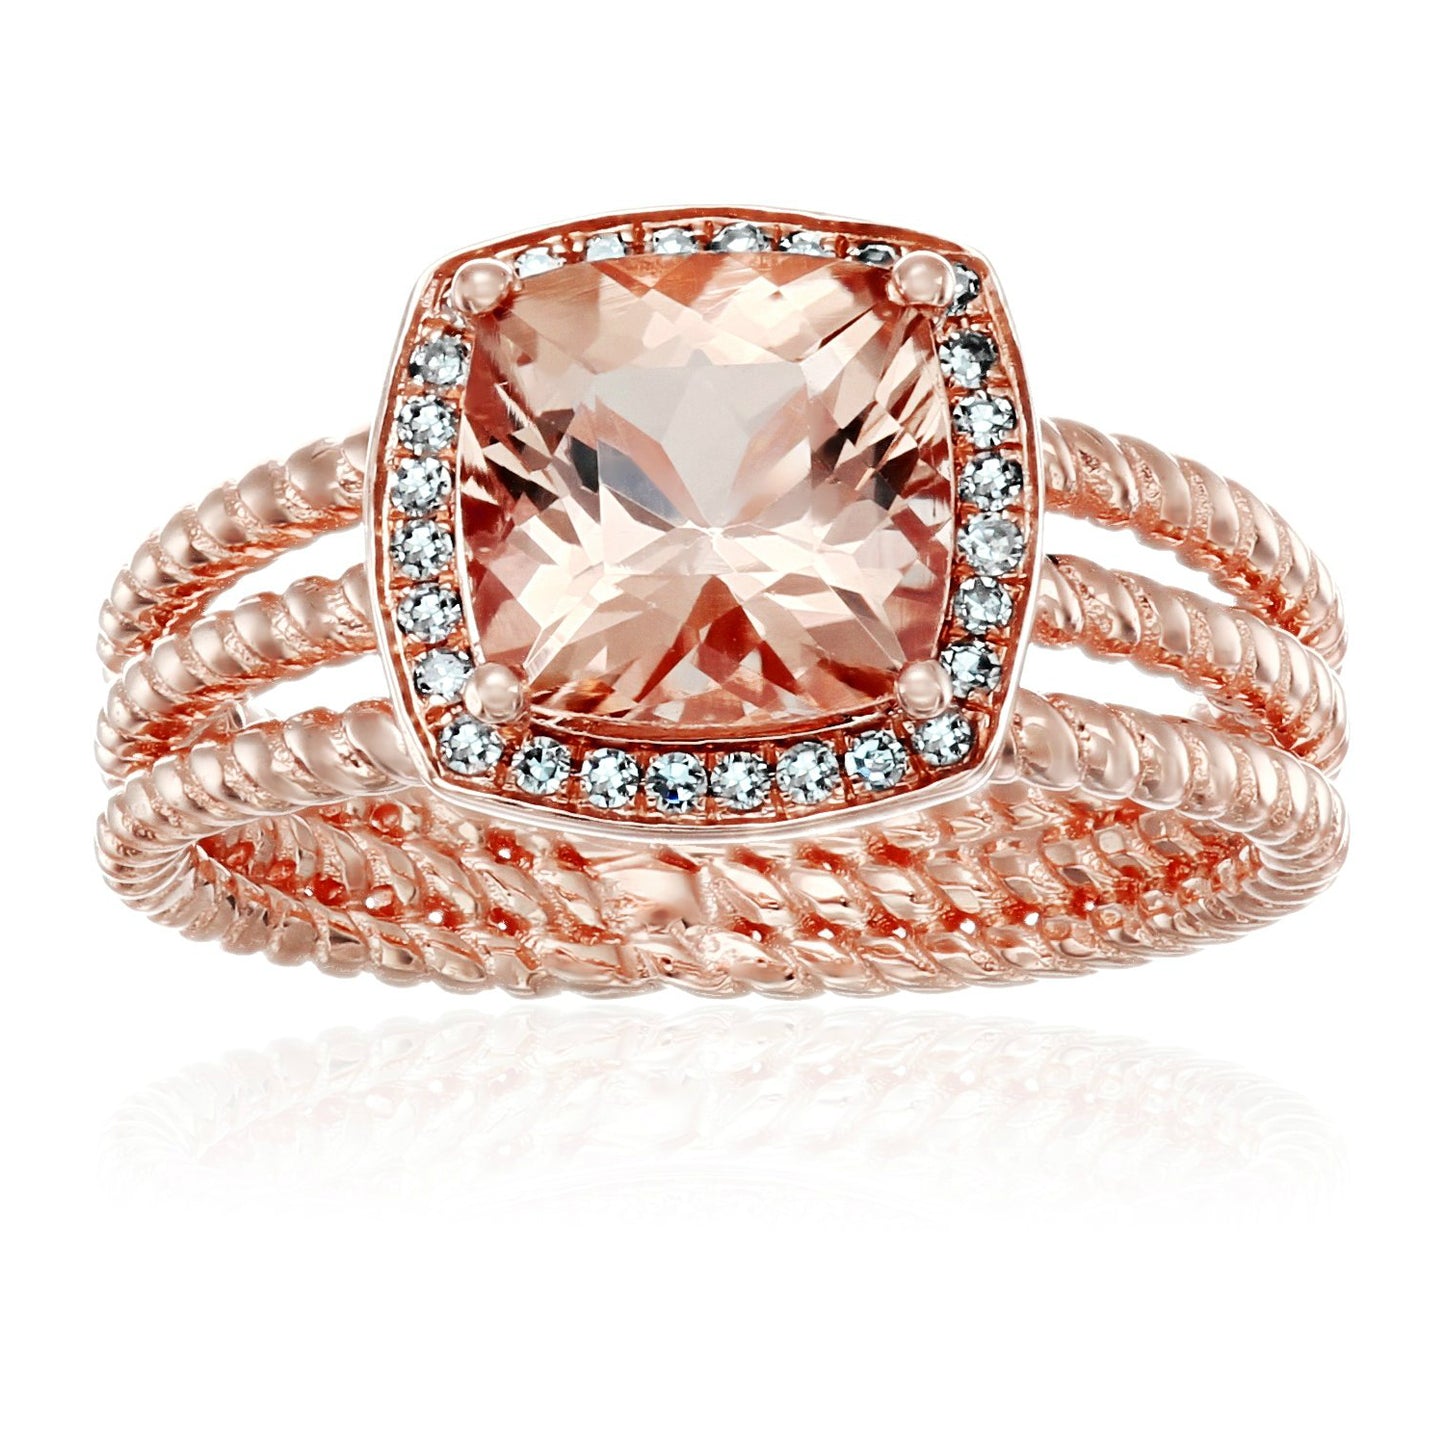 10k Rose Gold AAA Morganite And Diamond Cushion Halo Engagement Ring (1/10cttw, H-I Color, I1-I2 Clarity), - pinctore